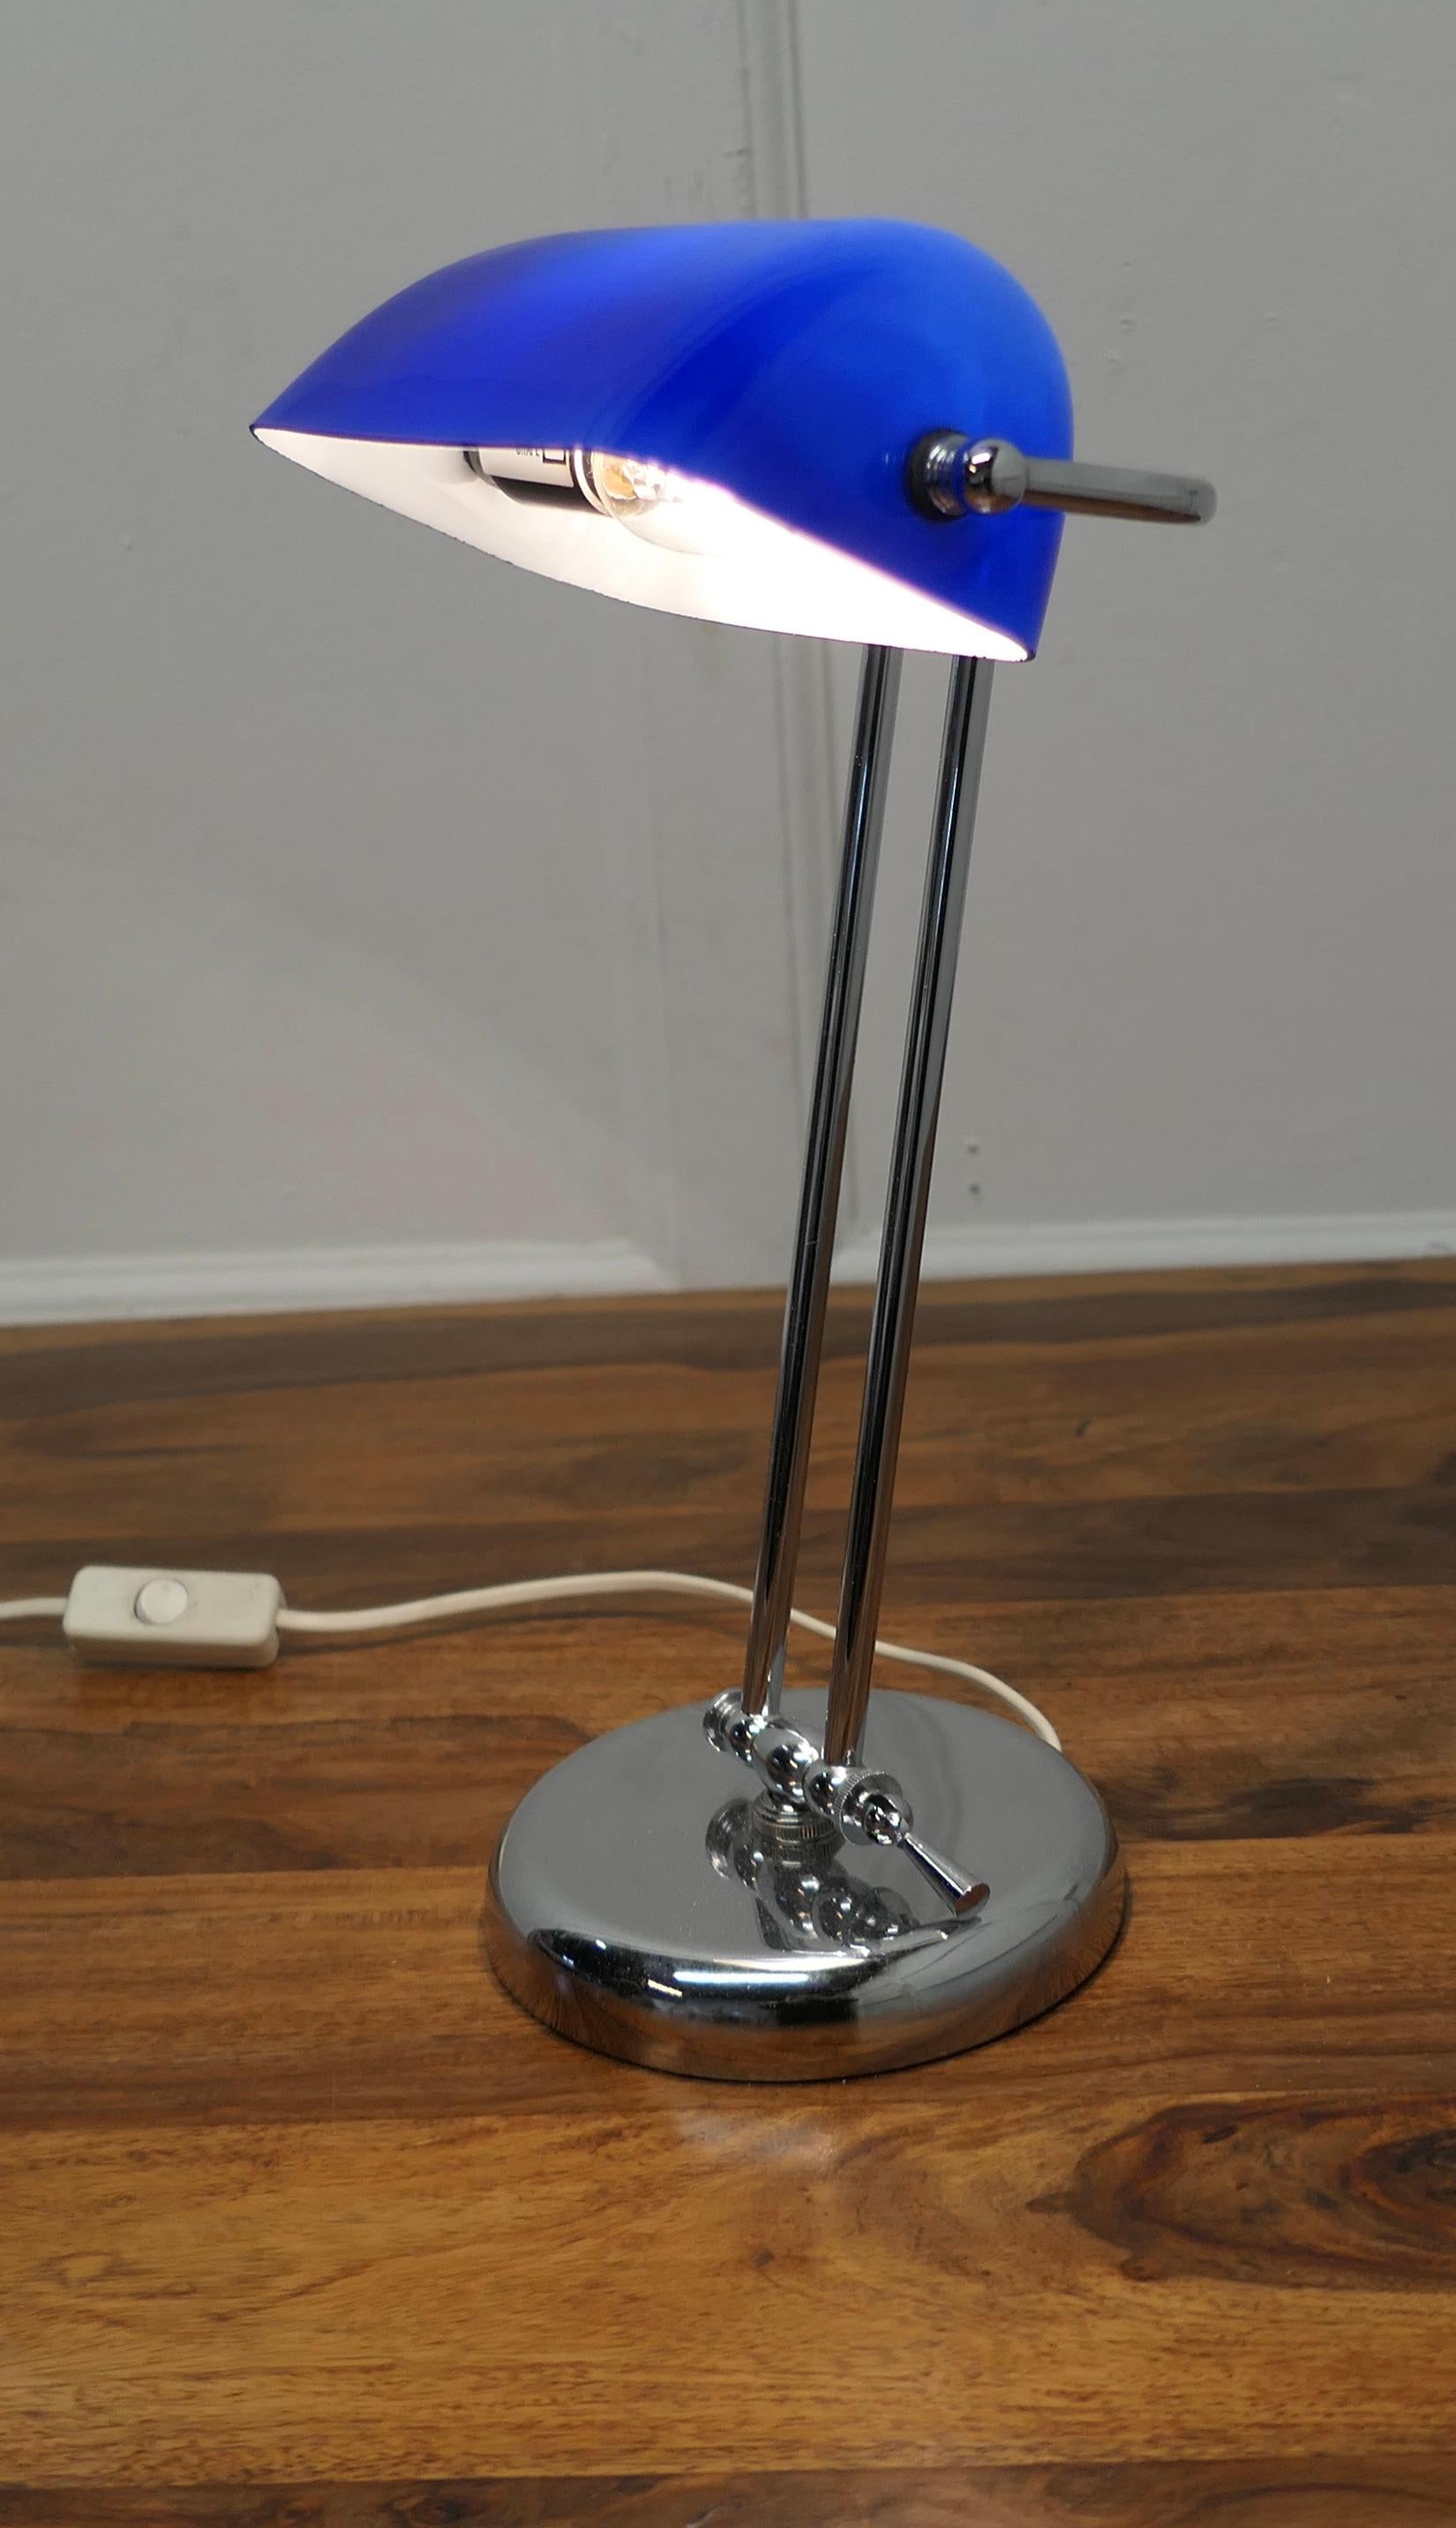 Mid Century Cobalt and Chrome Glass Library Desk Lamp

A beautiful quality fully adjustable Banker’s or Barrister’s desk lamp, with a Cobalt blue glass lampshade which has a white reflective underside set on a Chrome Frame
The Lamp is in good and